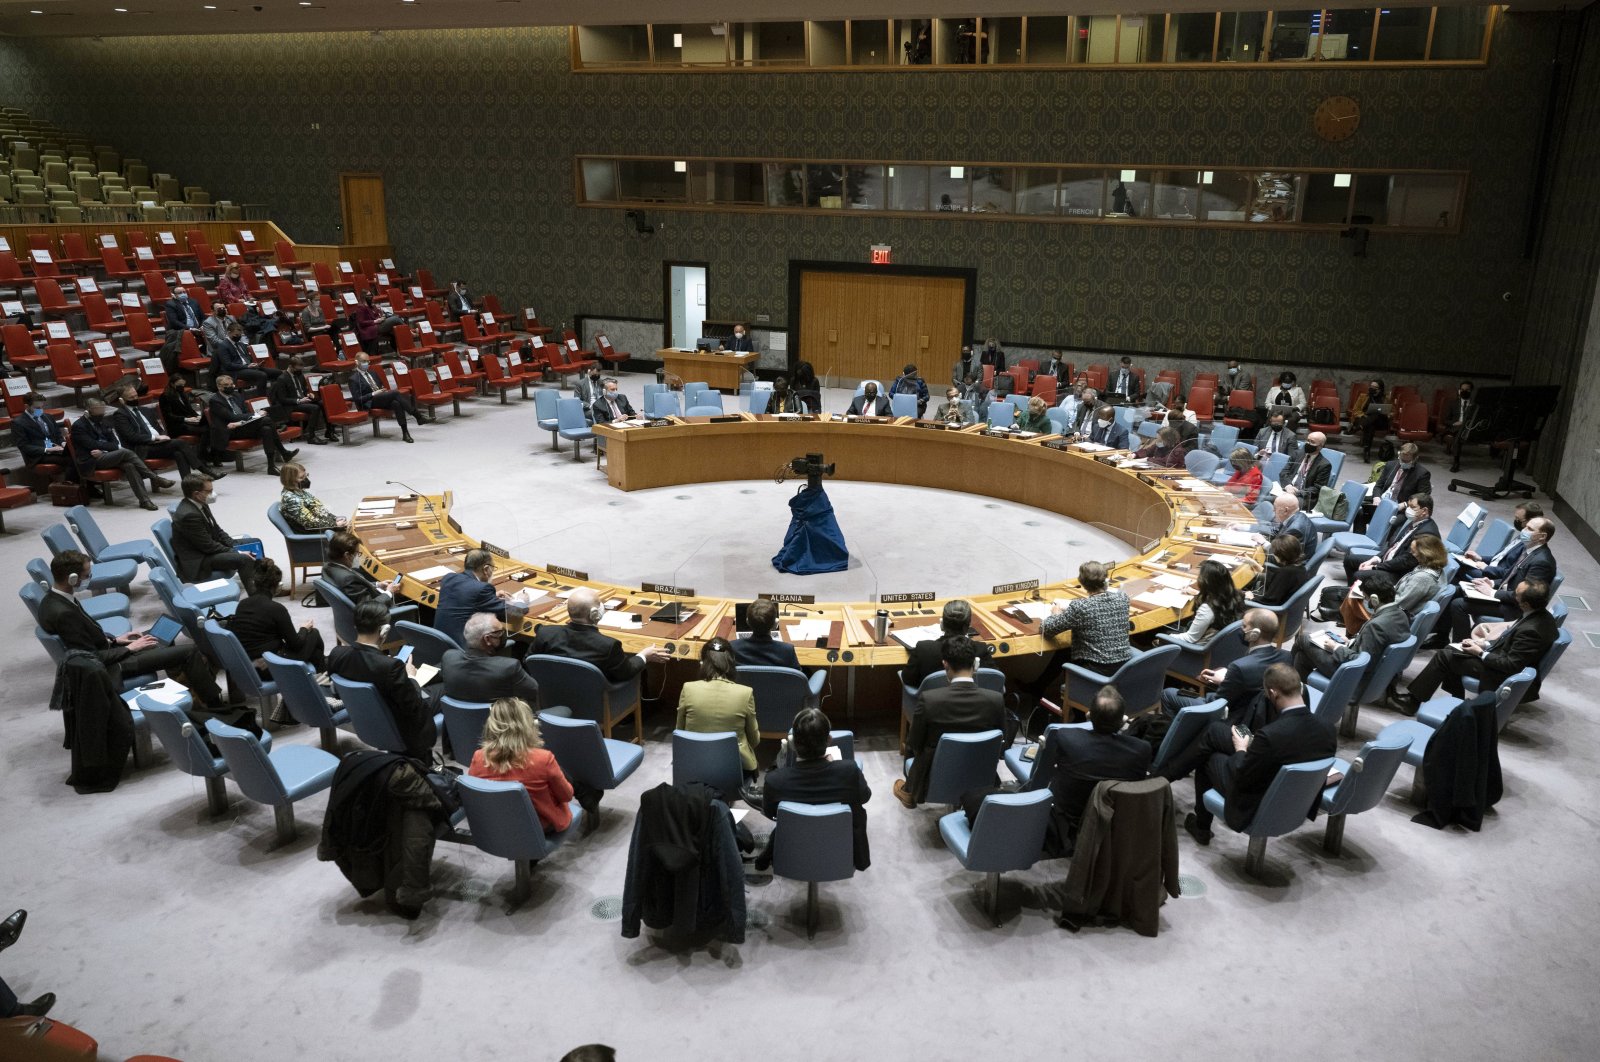 In this image provided by the United Nations, the U.N. Security Council meets at its headquarters for an emergency session on Ukraine, New York, U.S., Feb. 21, 2022. (AP Photo)